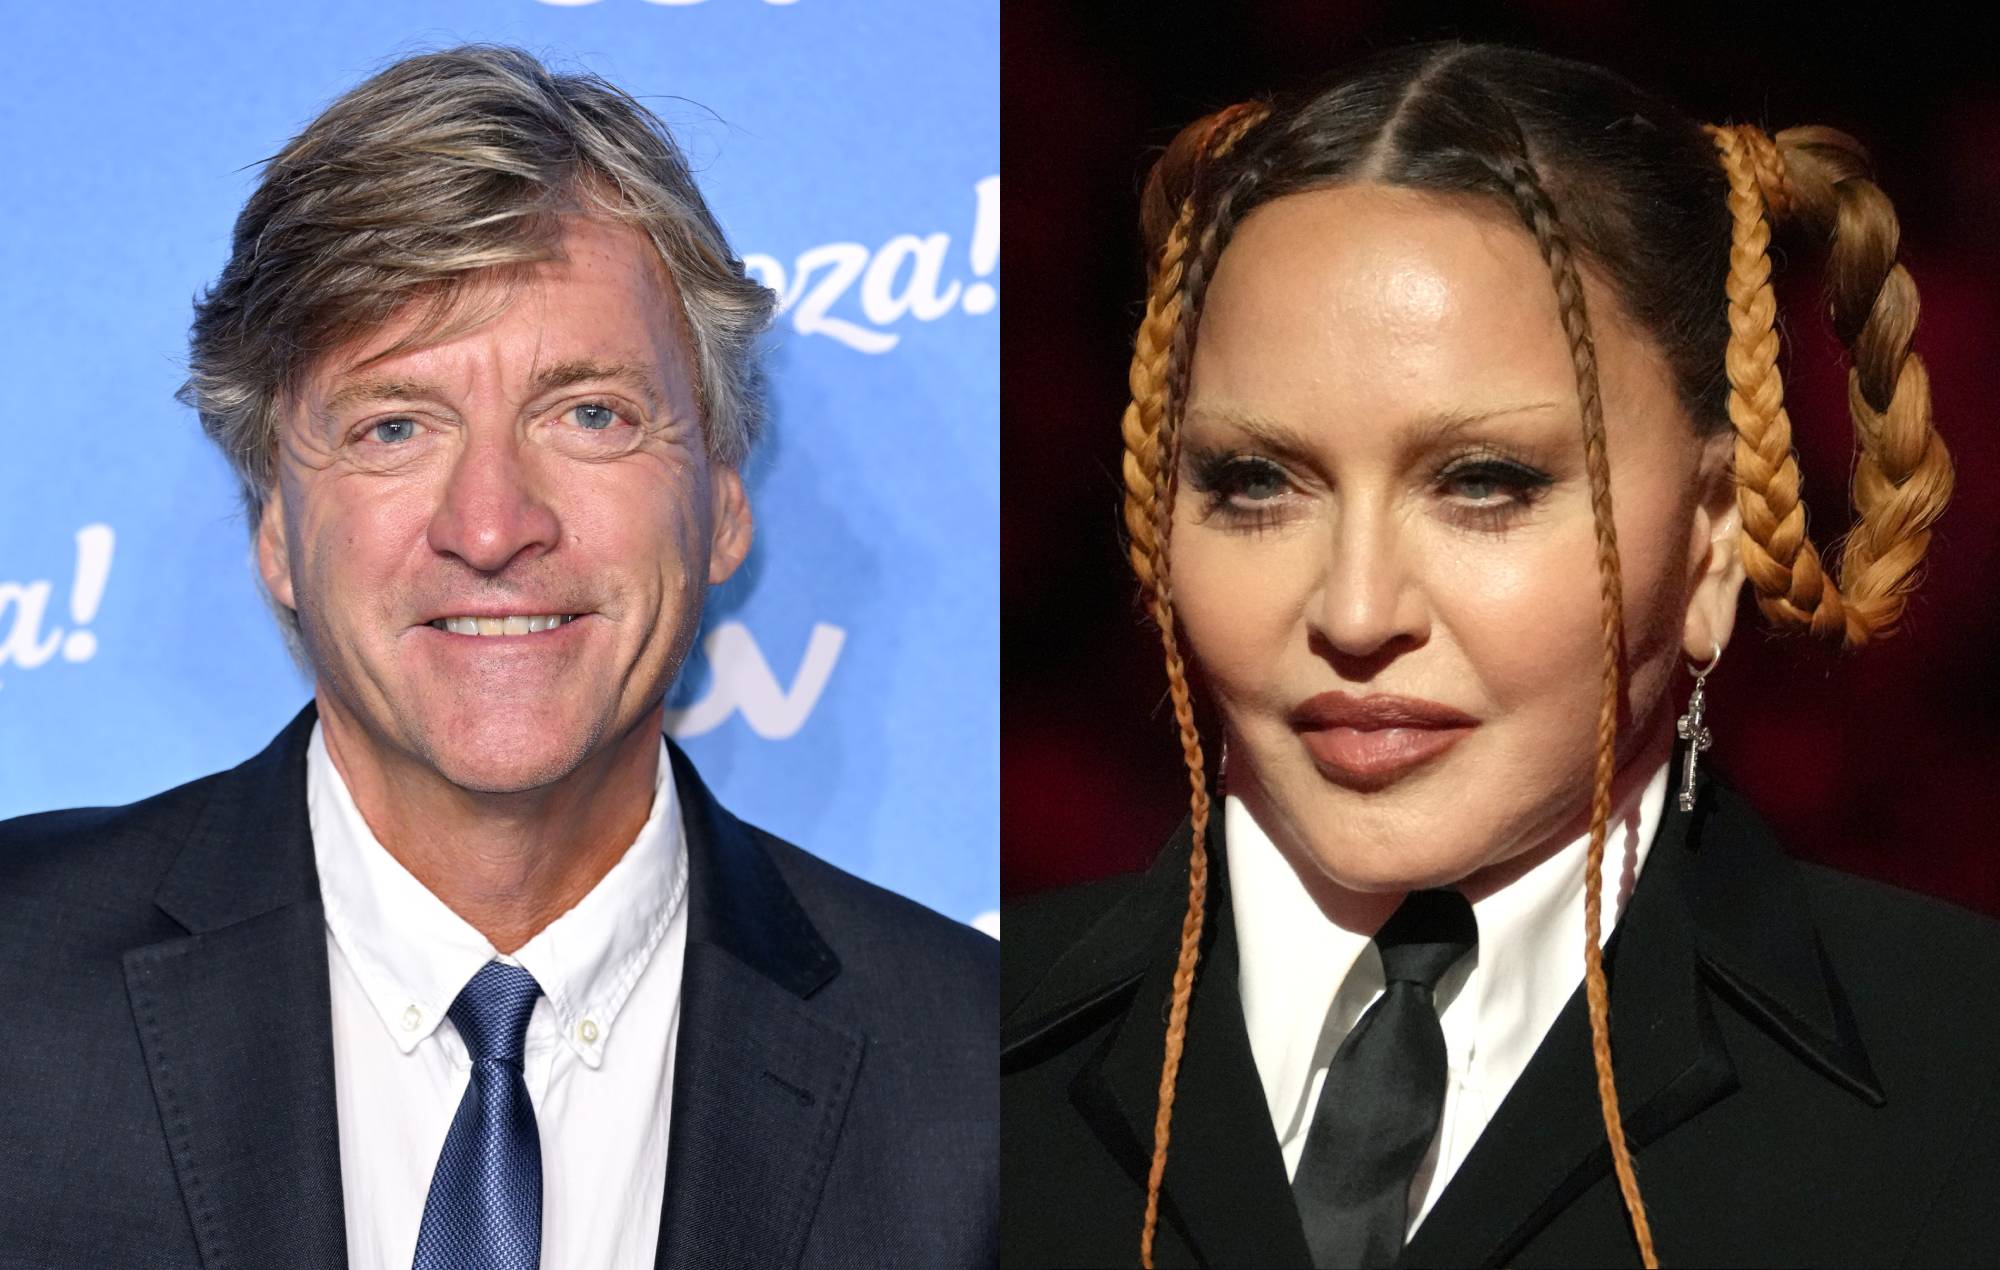 Richard Madeley “so angry” that Madonna delayed their interview by “six hours”